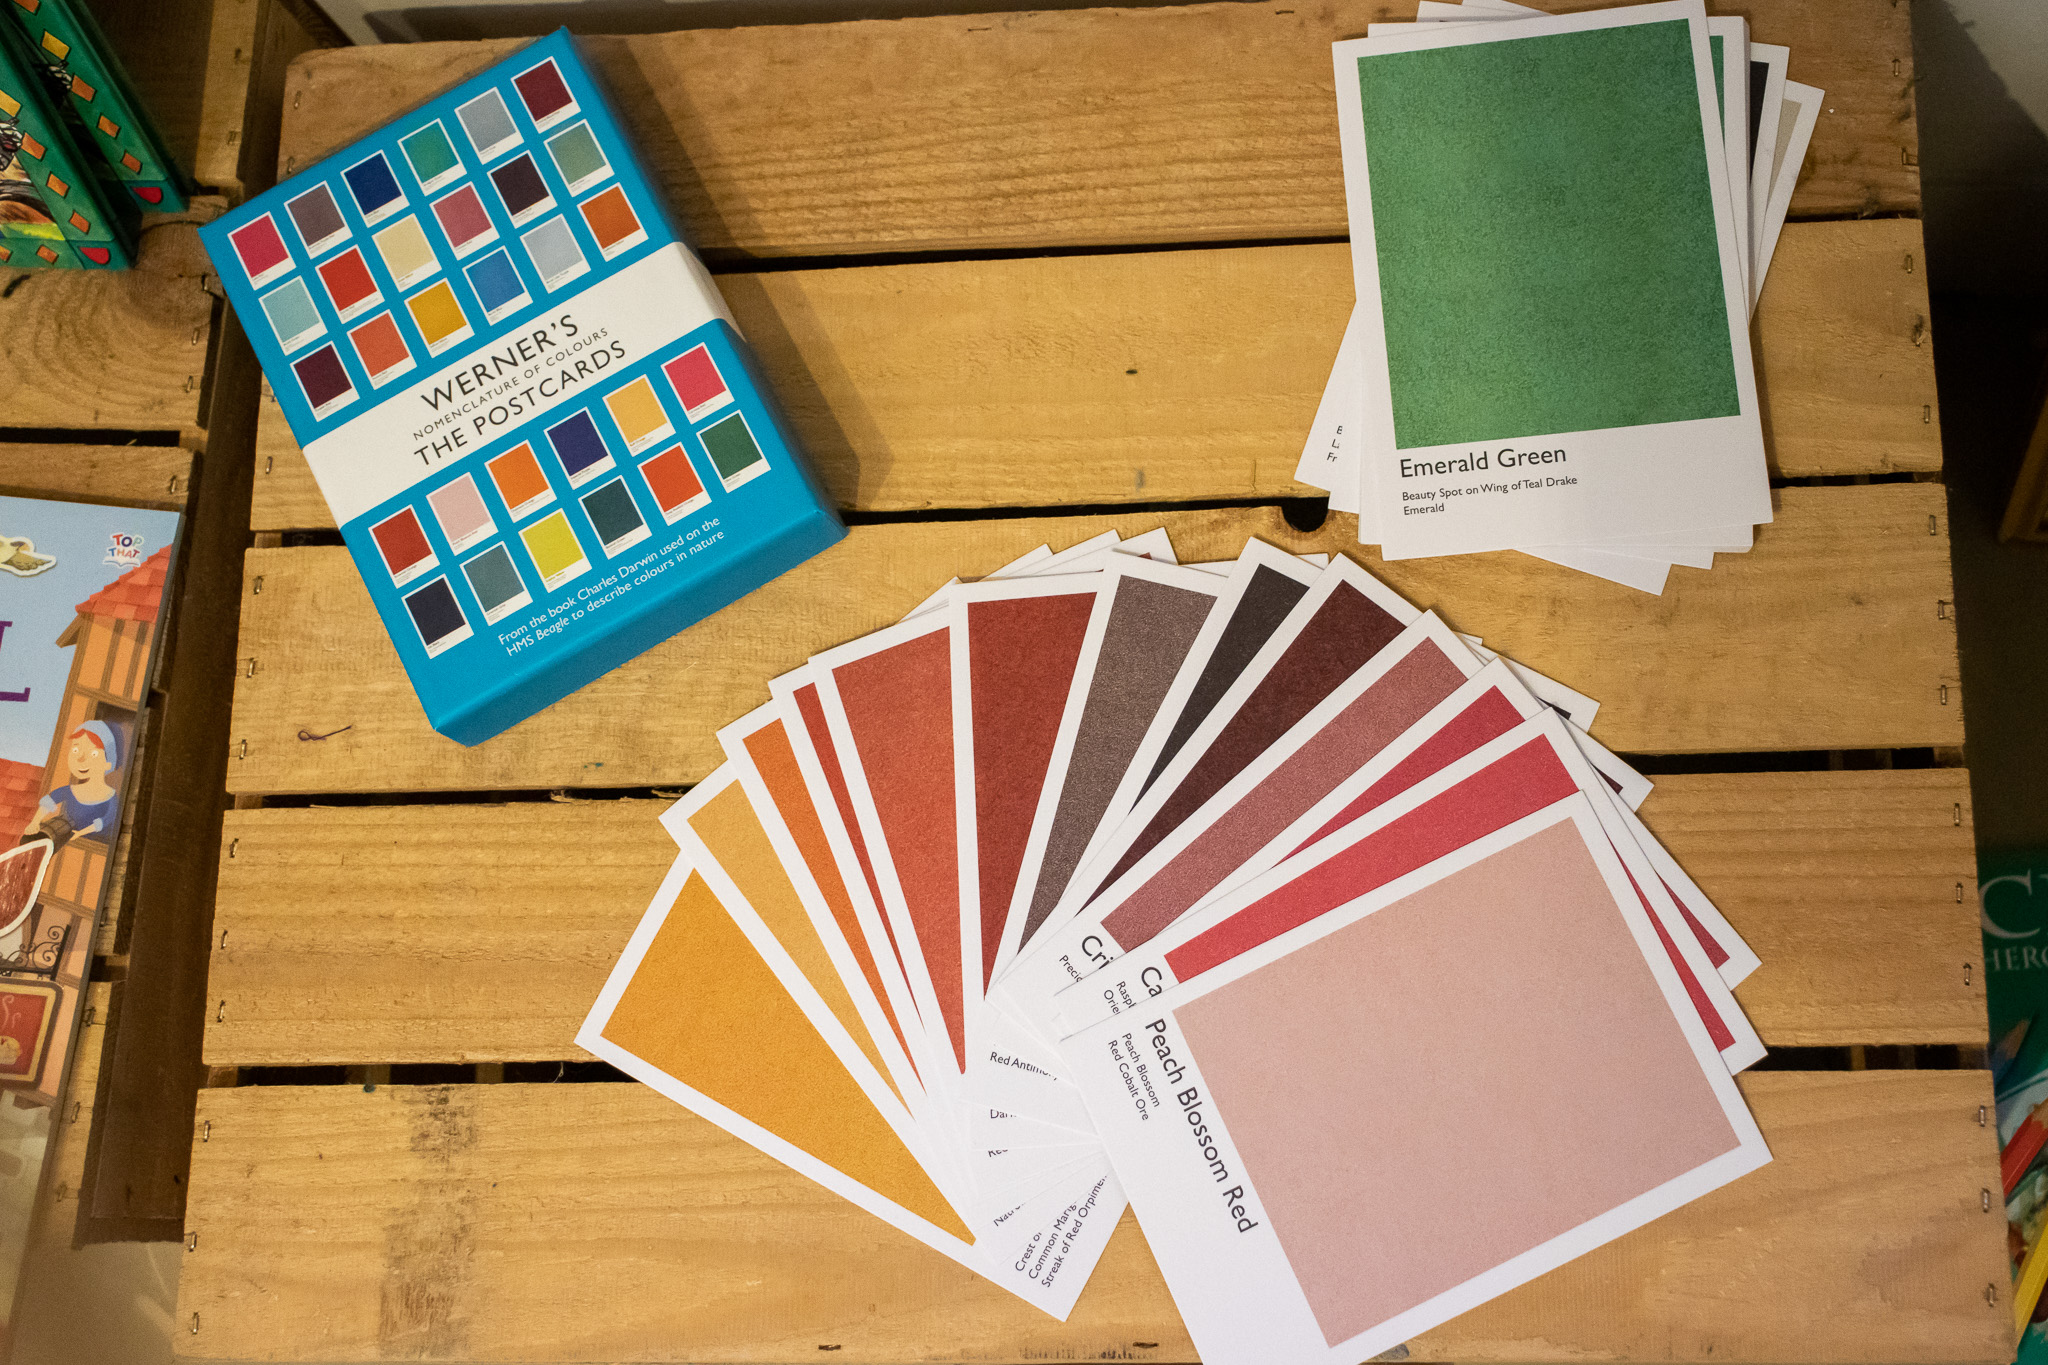 Display of postcards from 'Werner's Nomenclature of Colours: The Postcards'. A fanned-out display showing the colourful cards, each with a different colour, and most visible are 'peach blossom red' and 'emerald green'. Displayed on top of a wooden box.